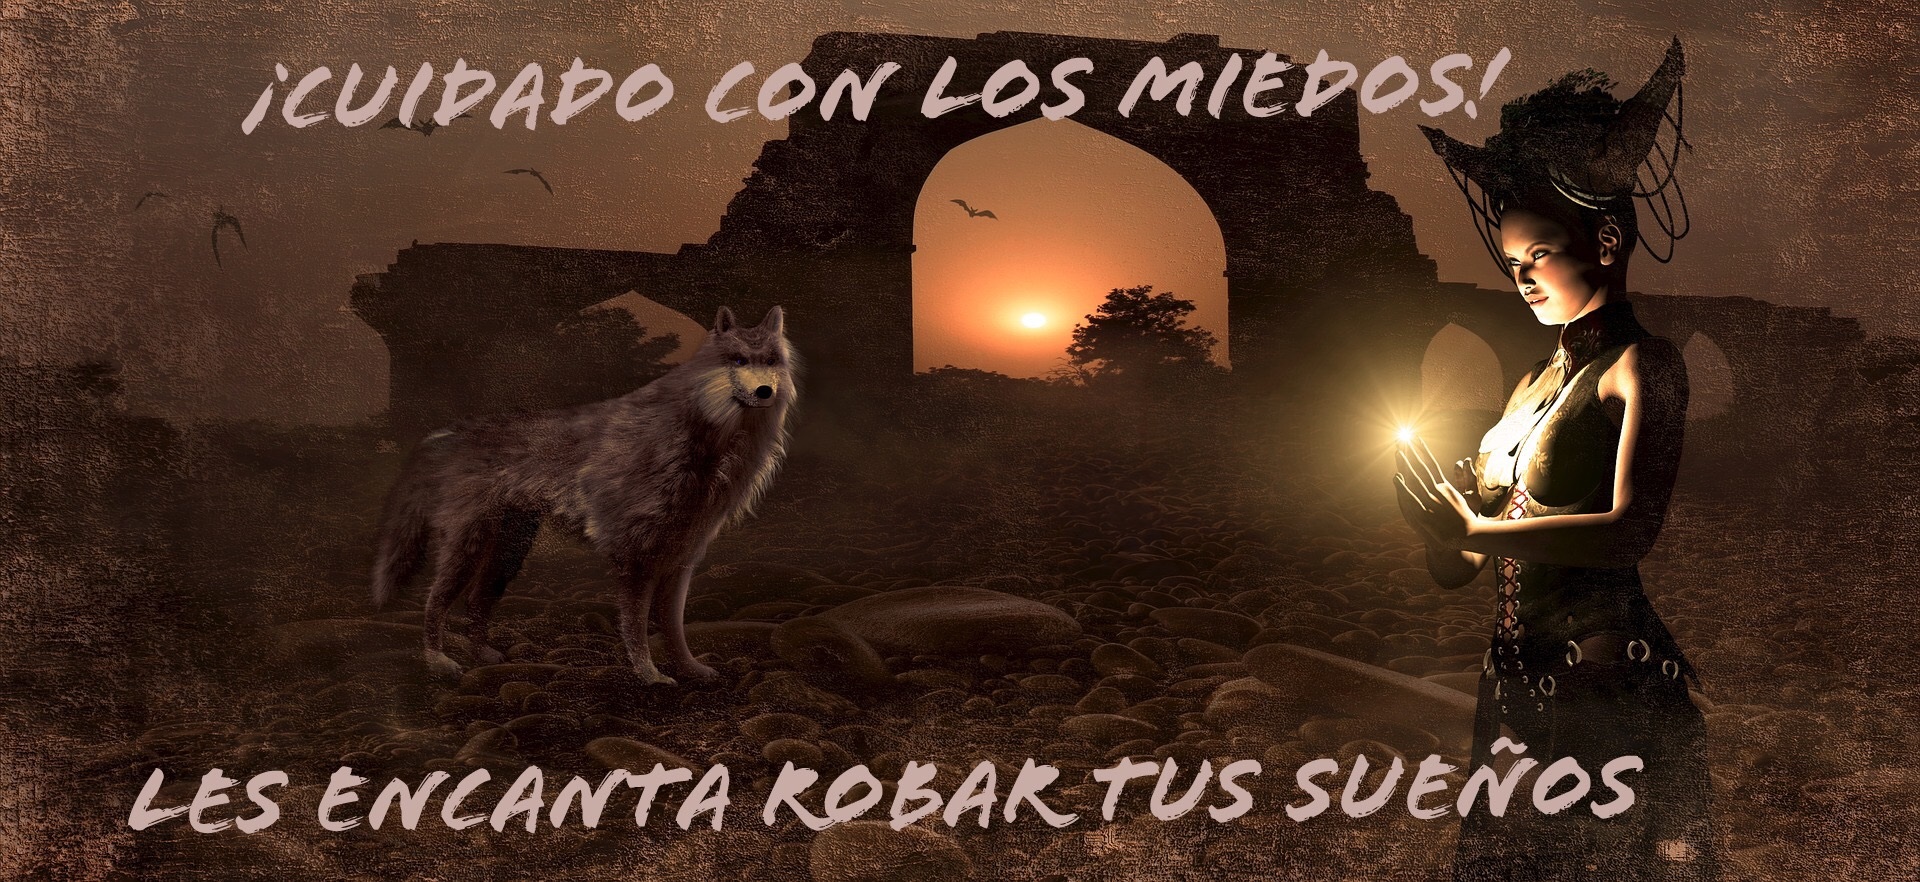 frases miedo 4